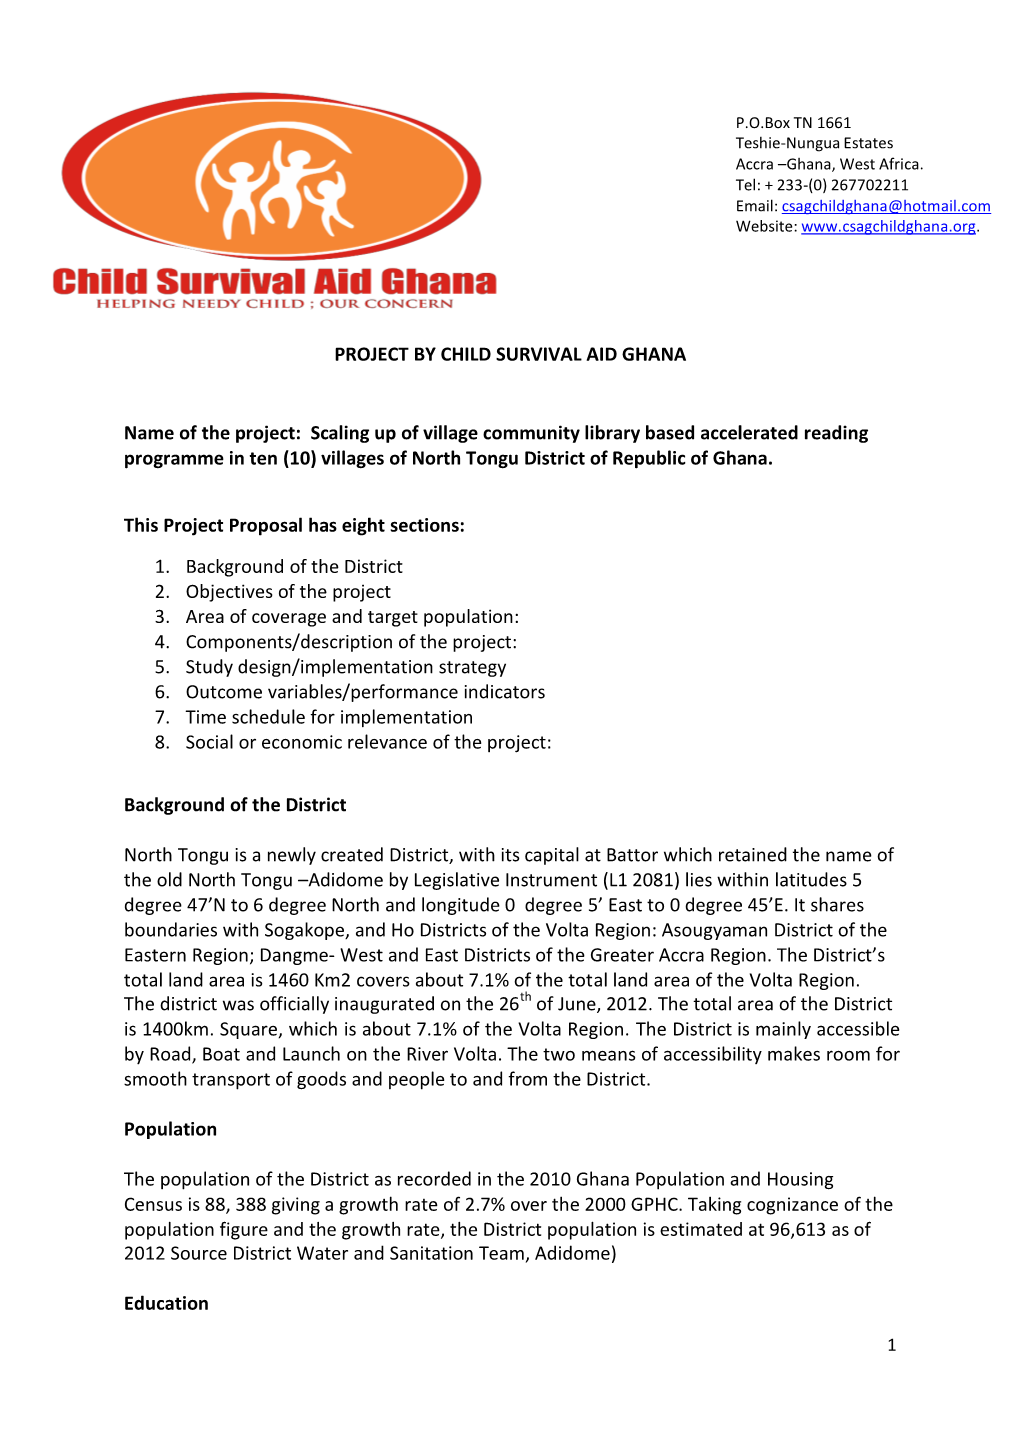 PROJECT by CHILD SURVIVAL AID GHANA Name of the Project